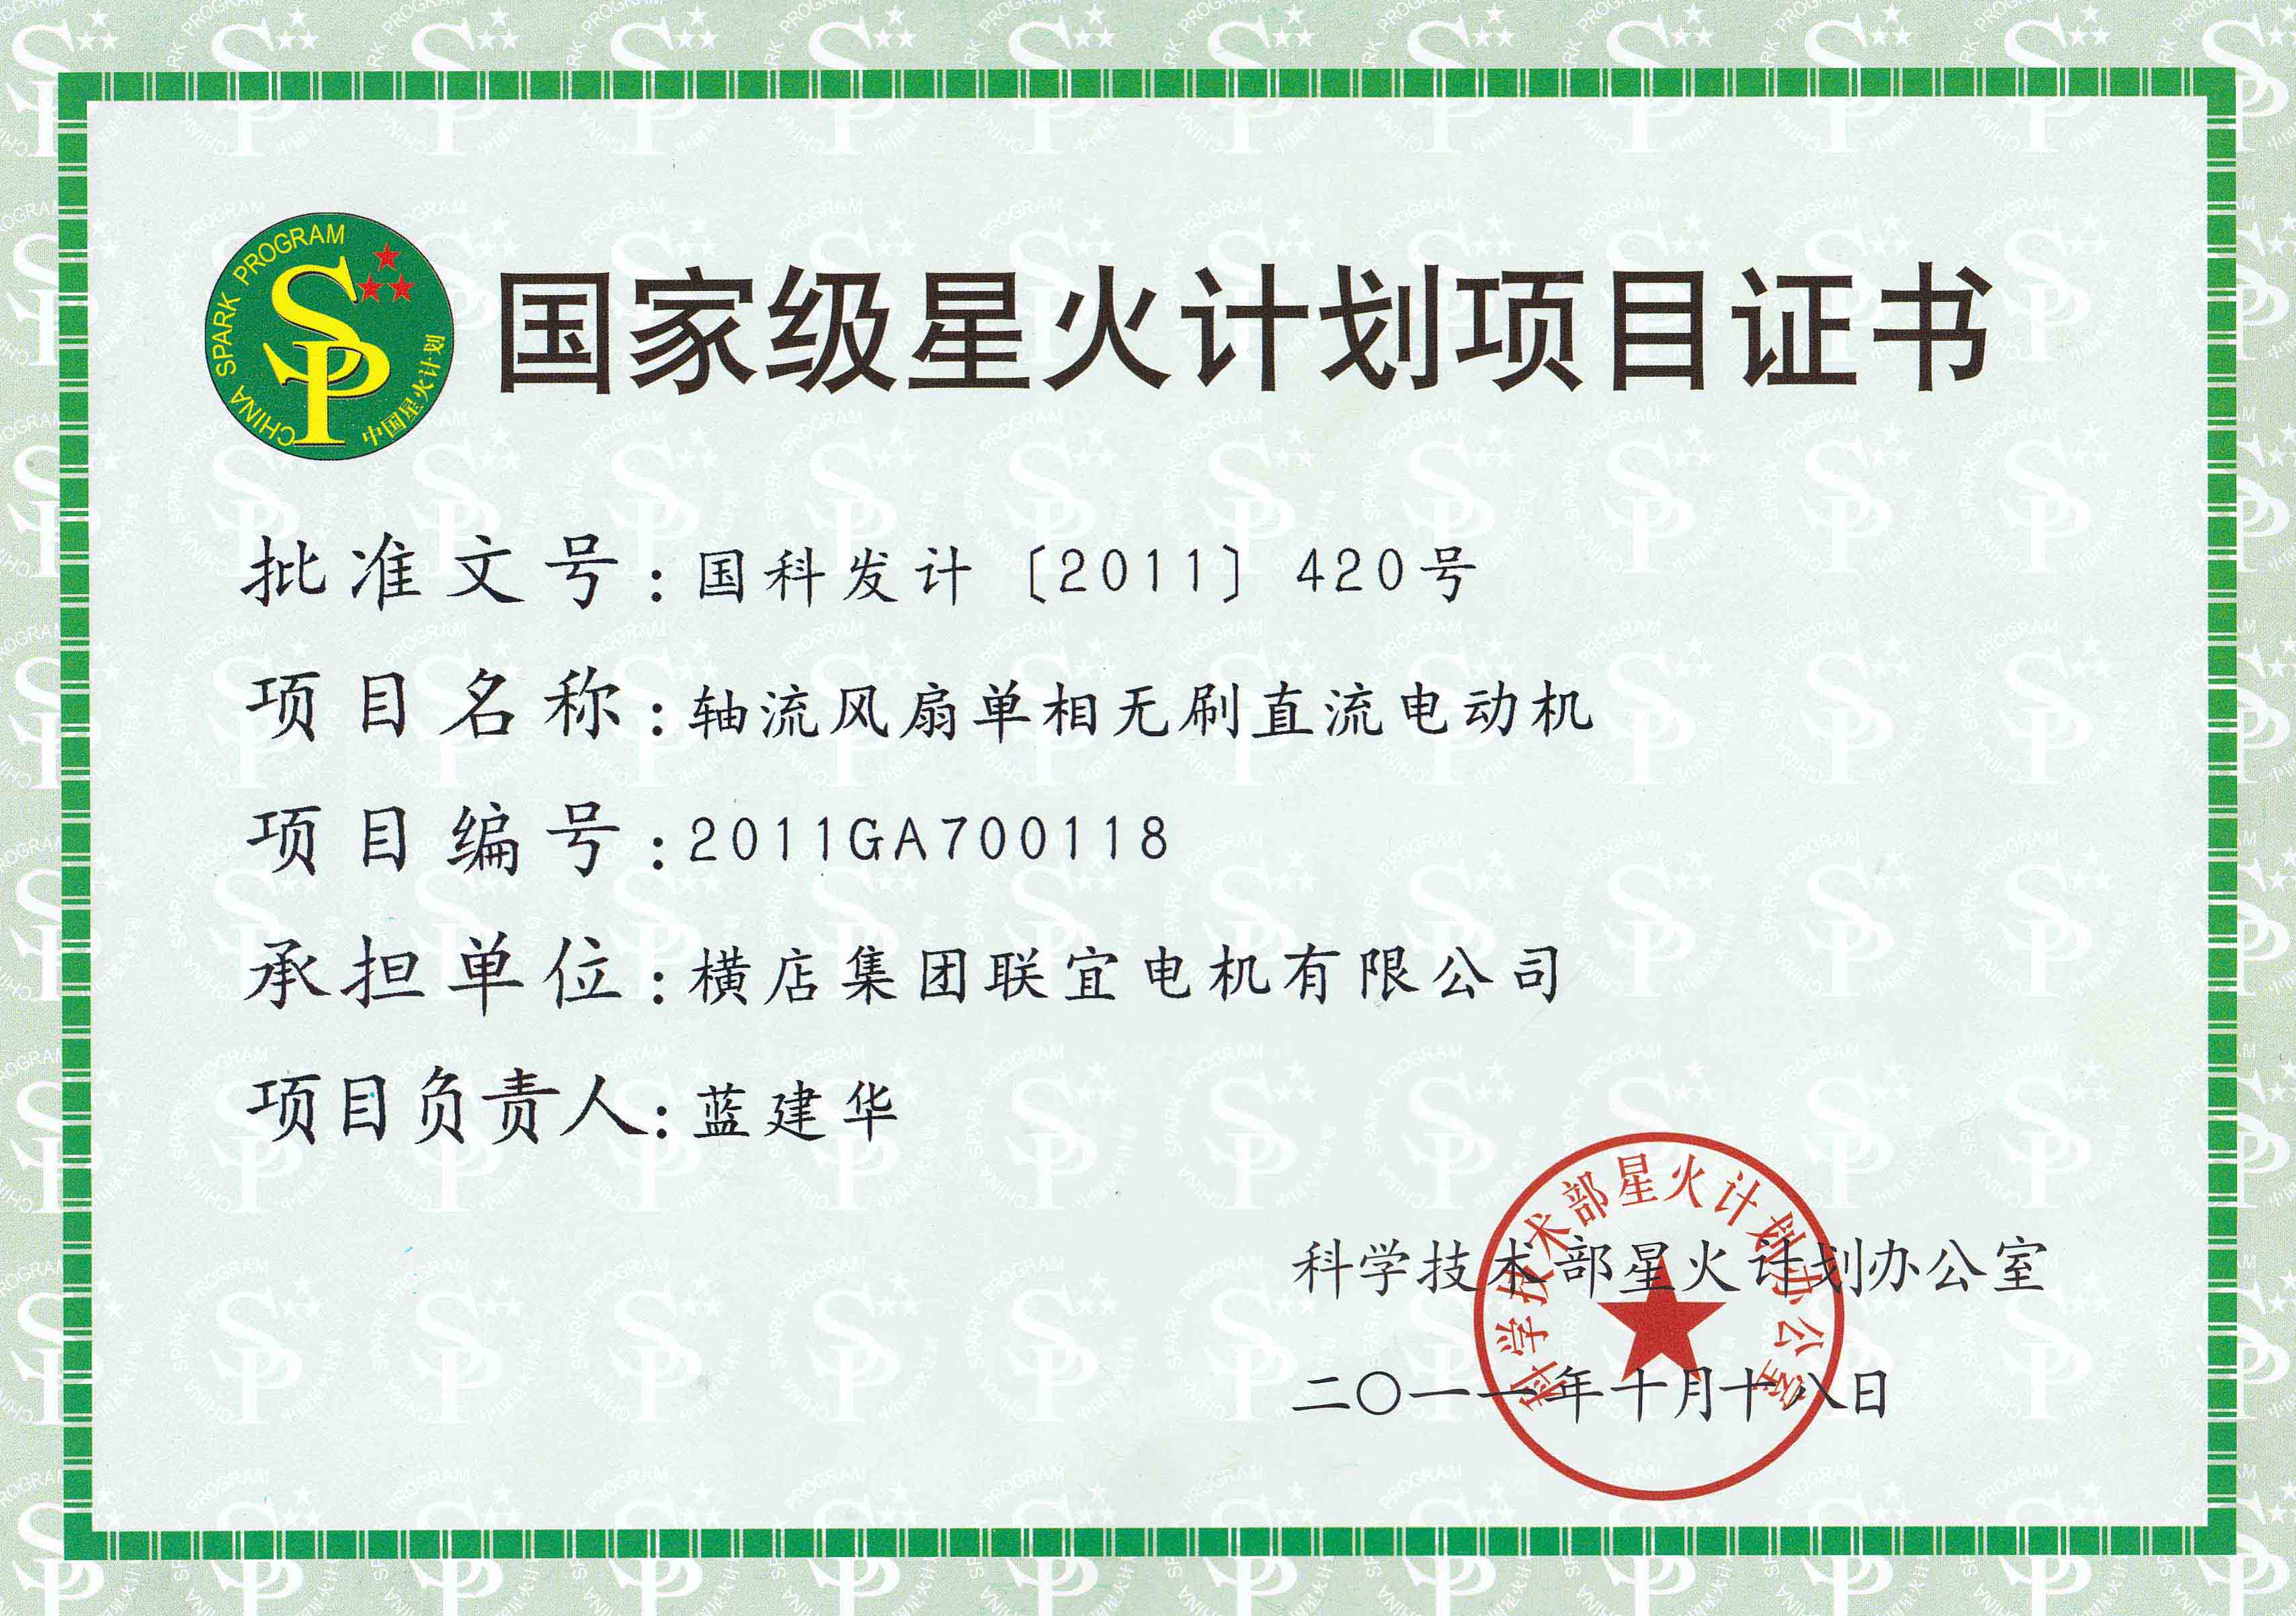 National Spark plan project certificate - axial fan single phase brushless DC motor